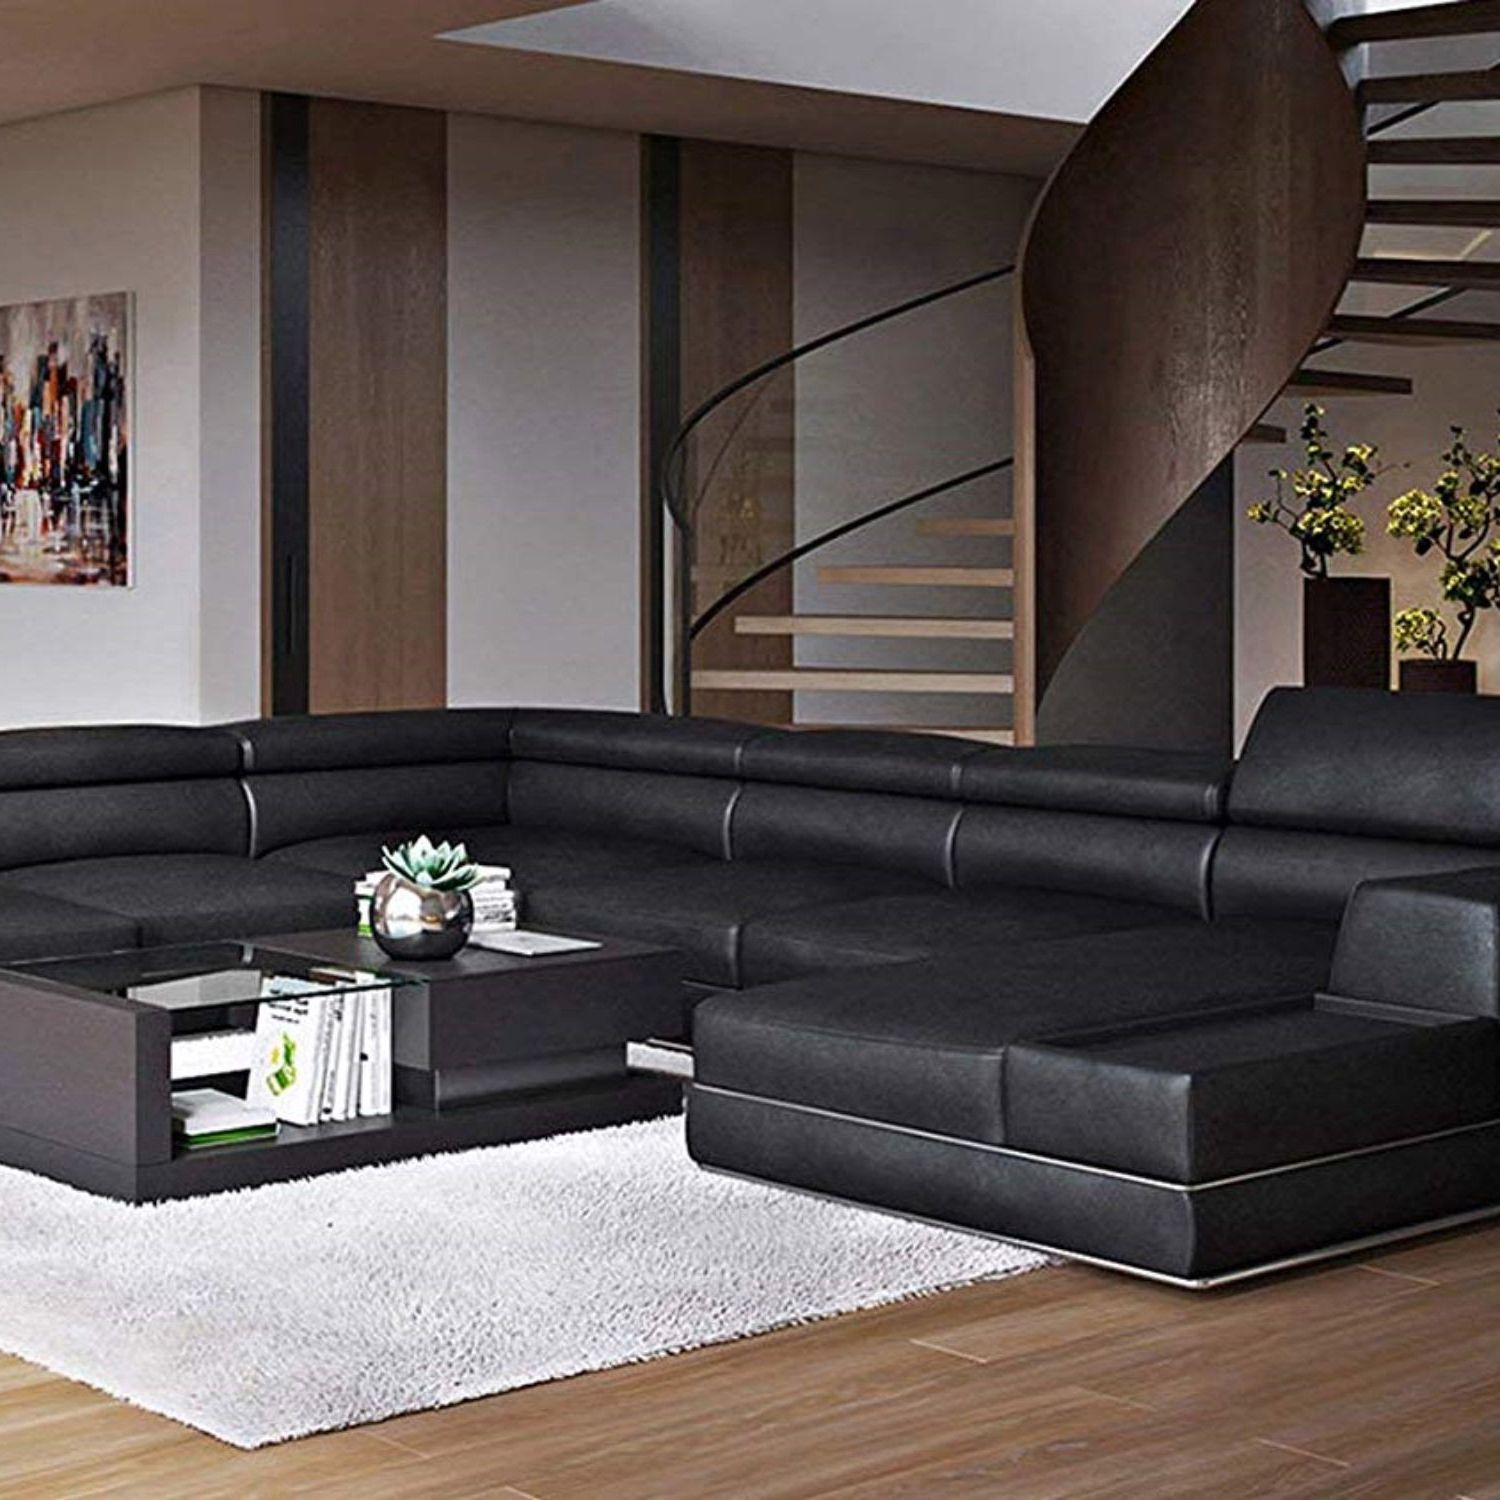 Modern Black Leather Sectional Sofa Living Room Couch Sleek Throughout Preferred Right Facing Black Sofas (View 8 of 15)